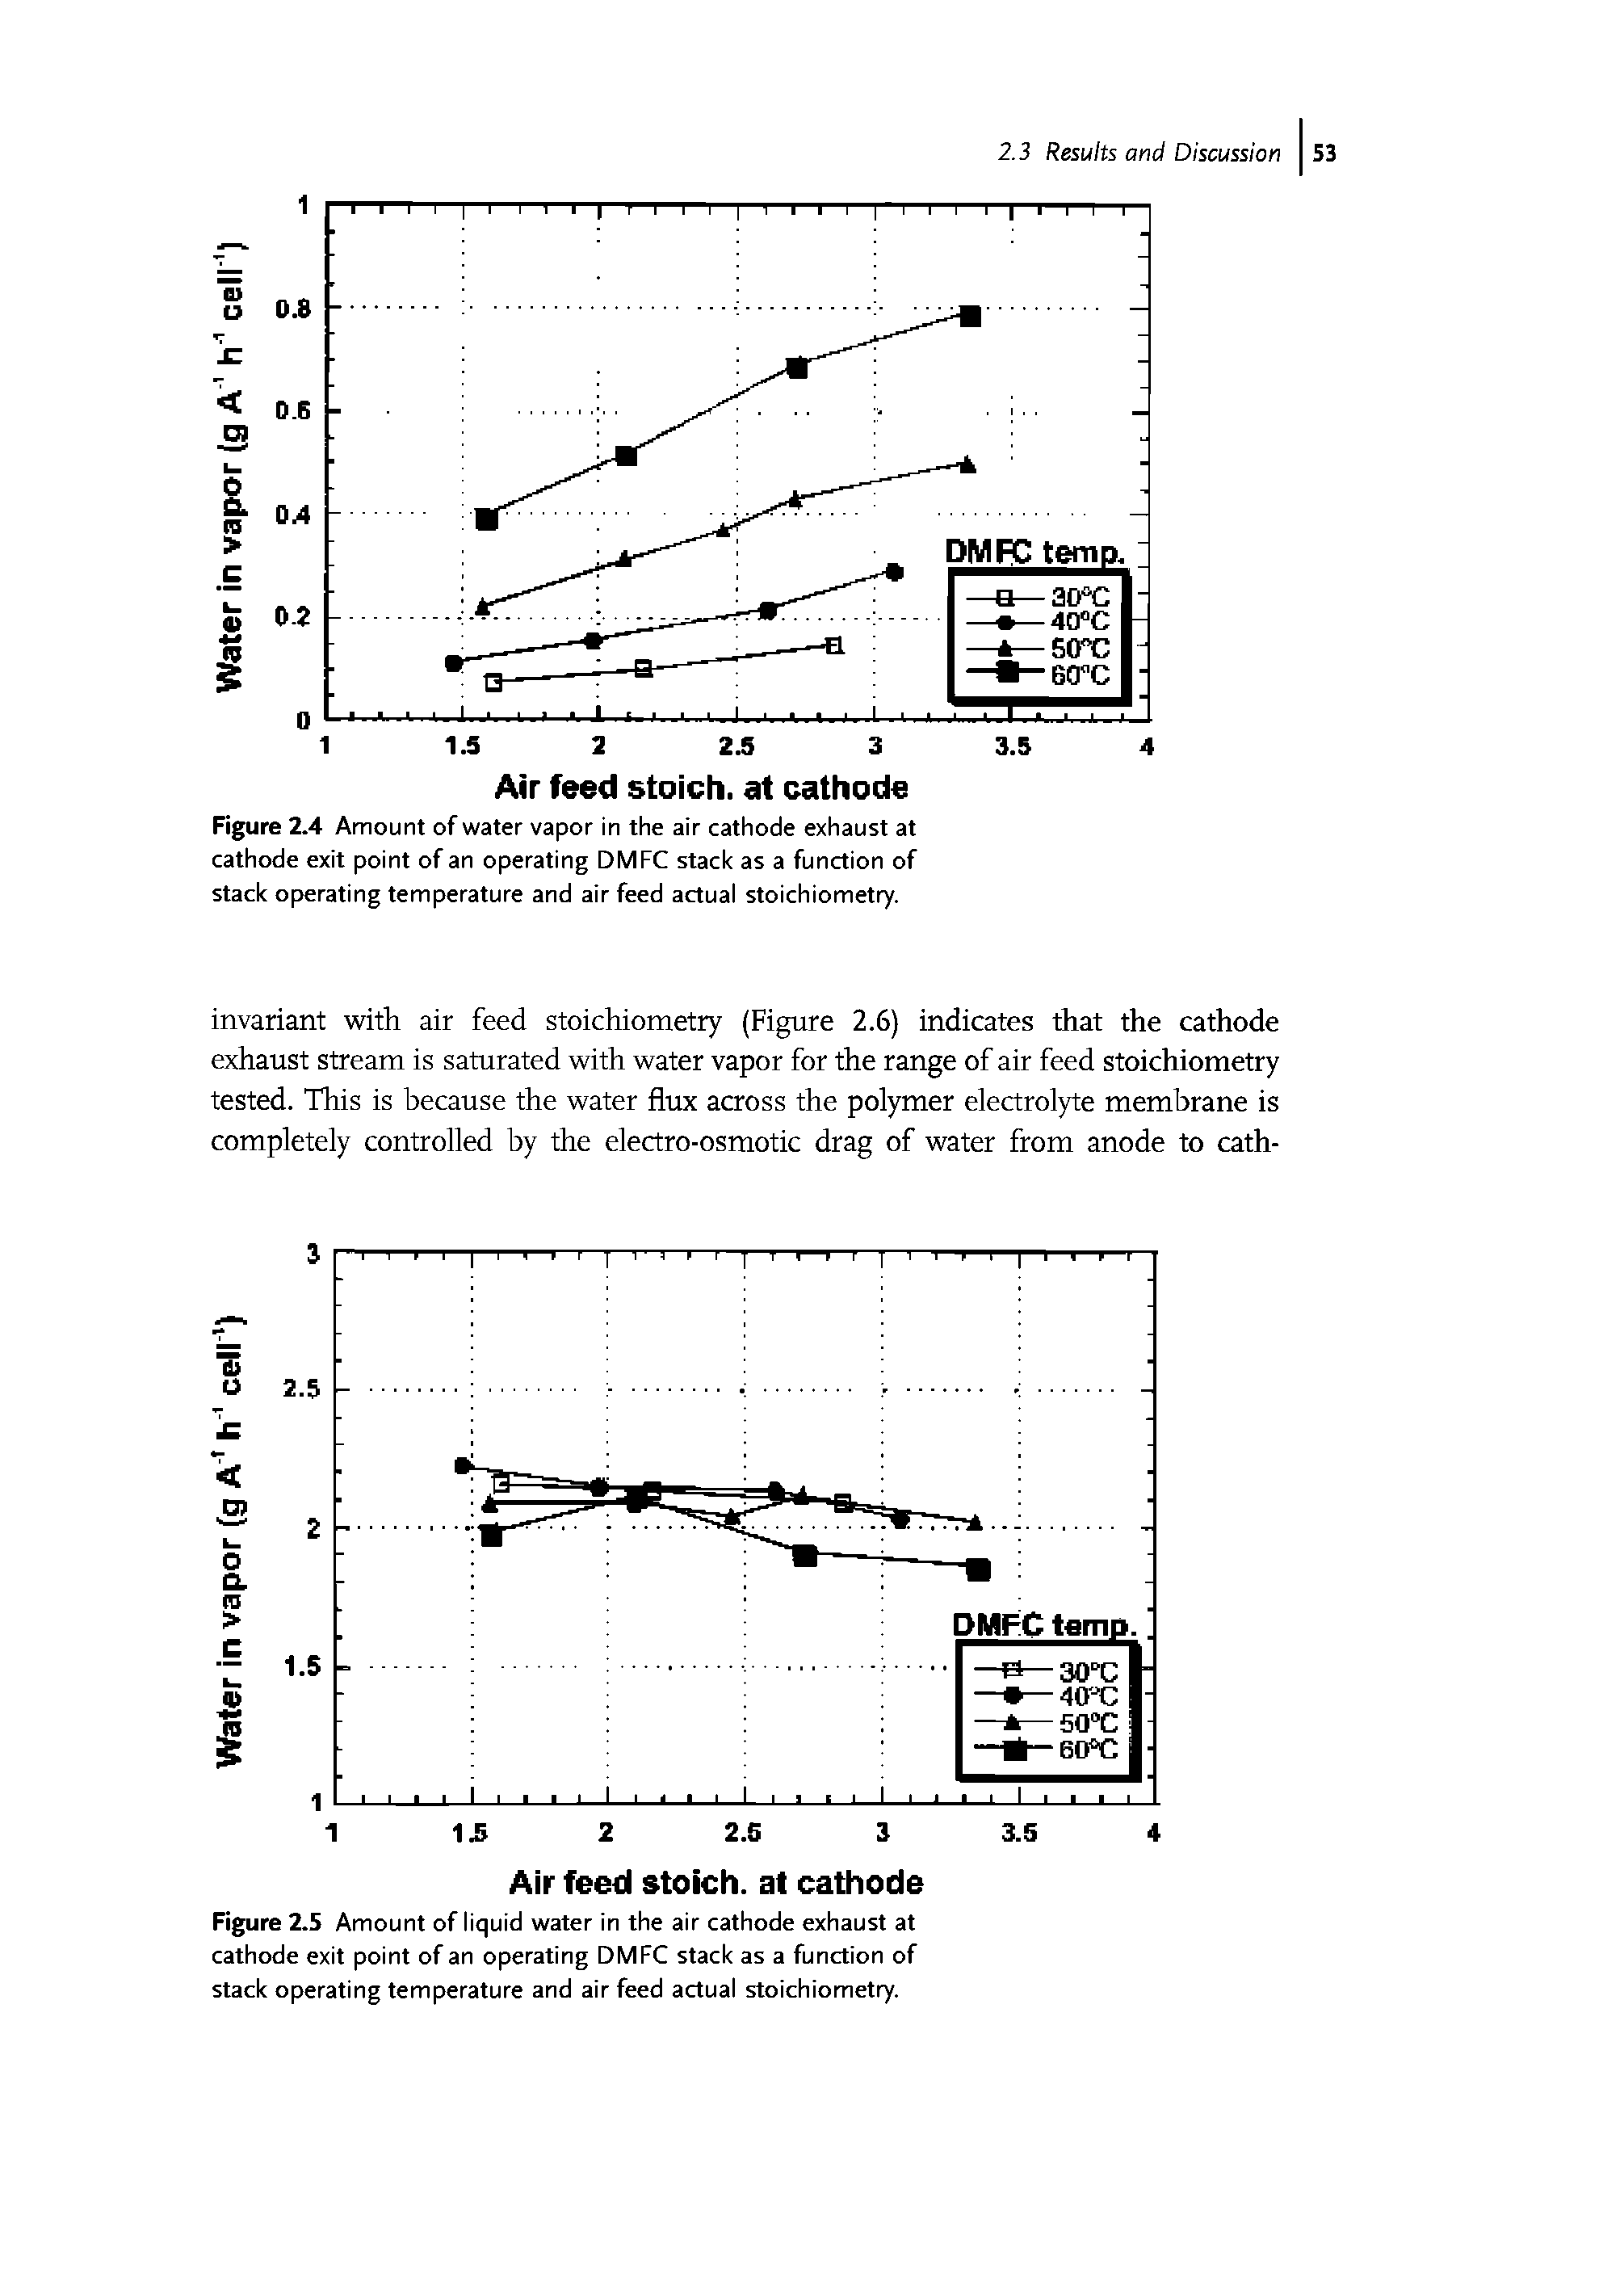 Figure 2.5 Amount of liquid water in the air cathode exhaust at cathode exit point of an operating DMFC stack as a function of stack operating temperature and air feed actual stoichiometry.